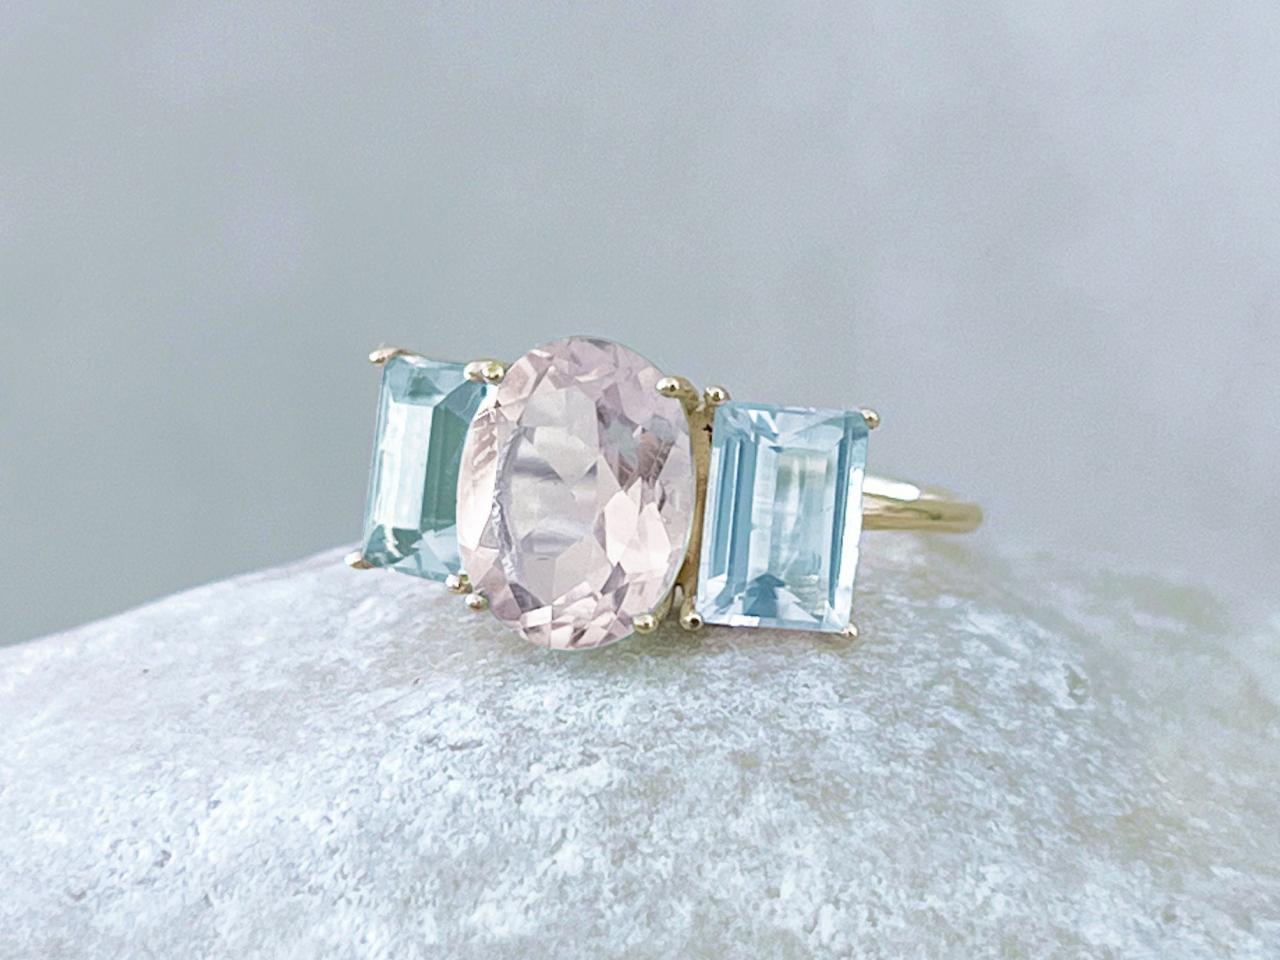  Solid gold rose quartz engagement ring, 3 natural stone statement promise ring, 18k classic blue topaz ring